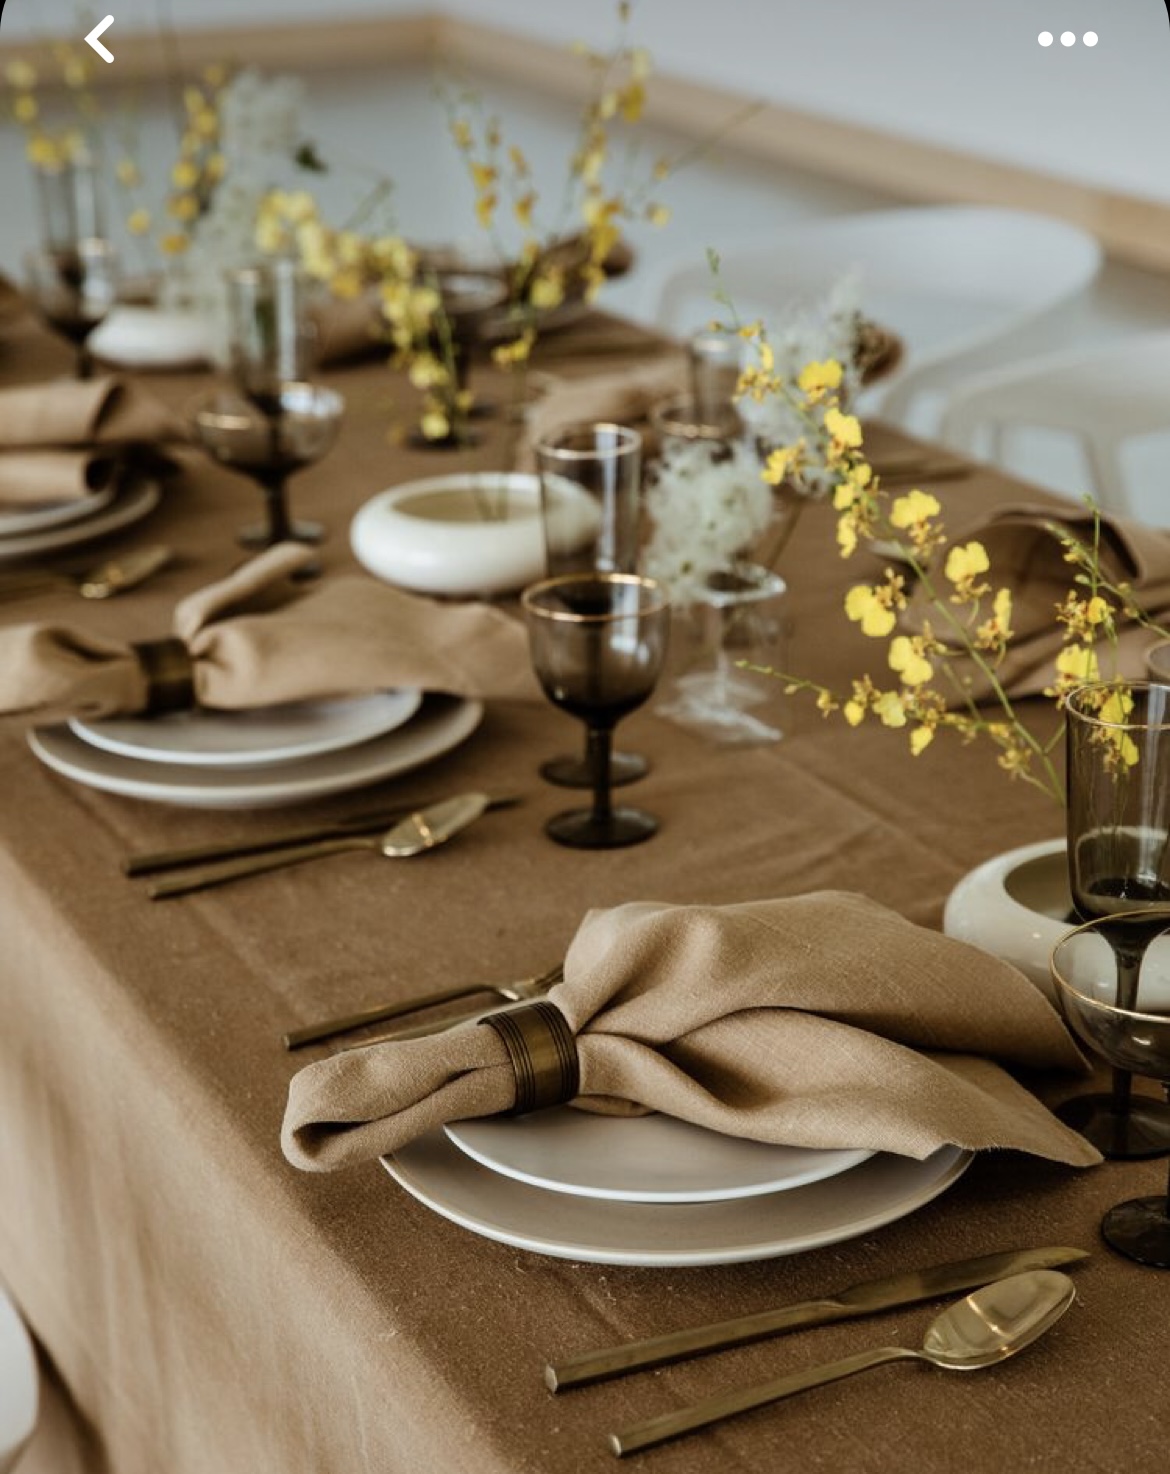 This is what you need to know to set an organic table easily